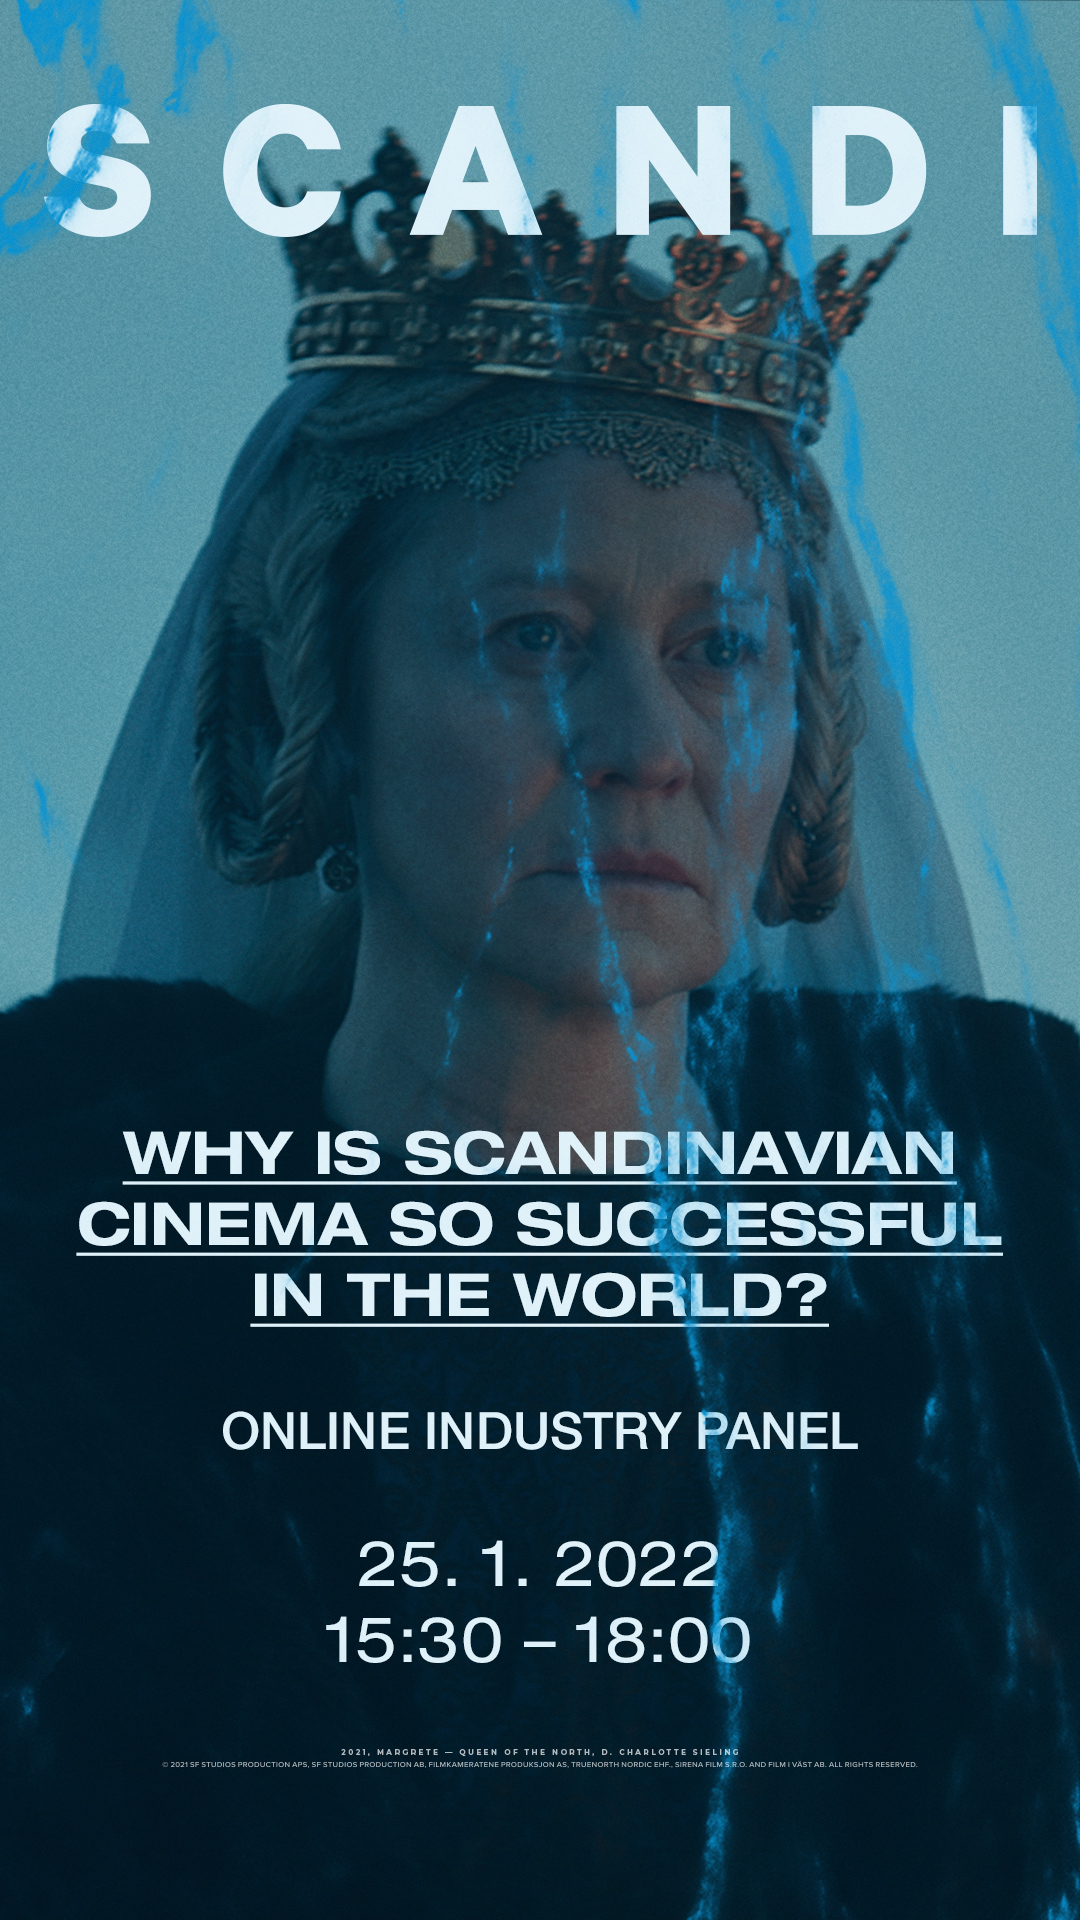 Why is Scandinavian cinema so successful in the world?